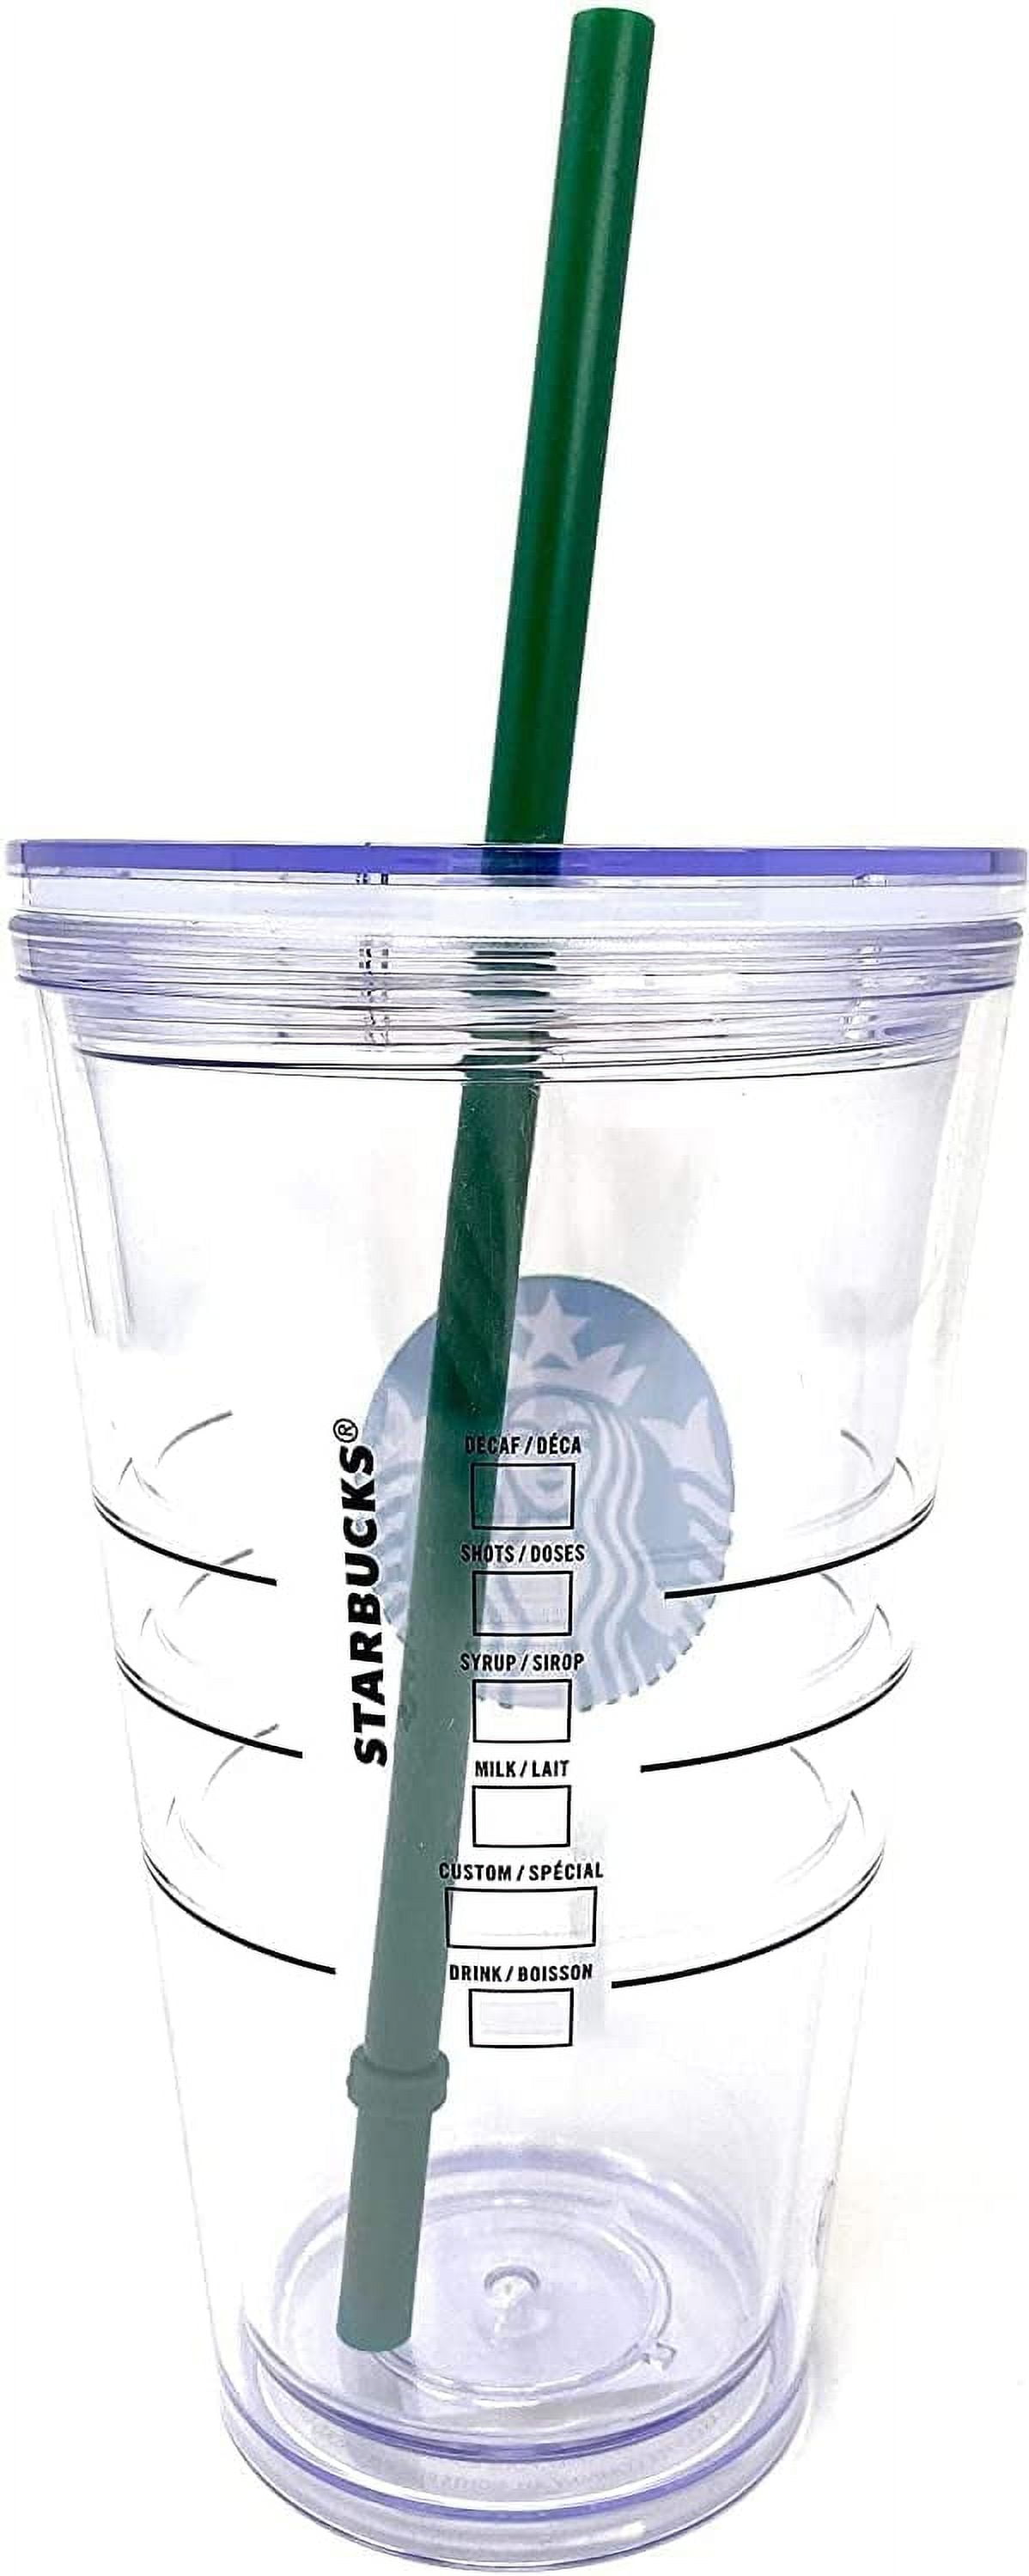 Reusable Glass Straw for Cold Cup Sippy Cup Starbucks Tumbler